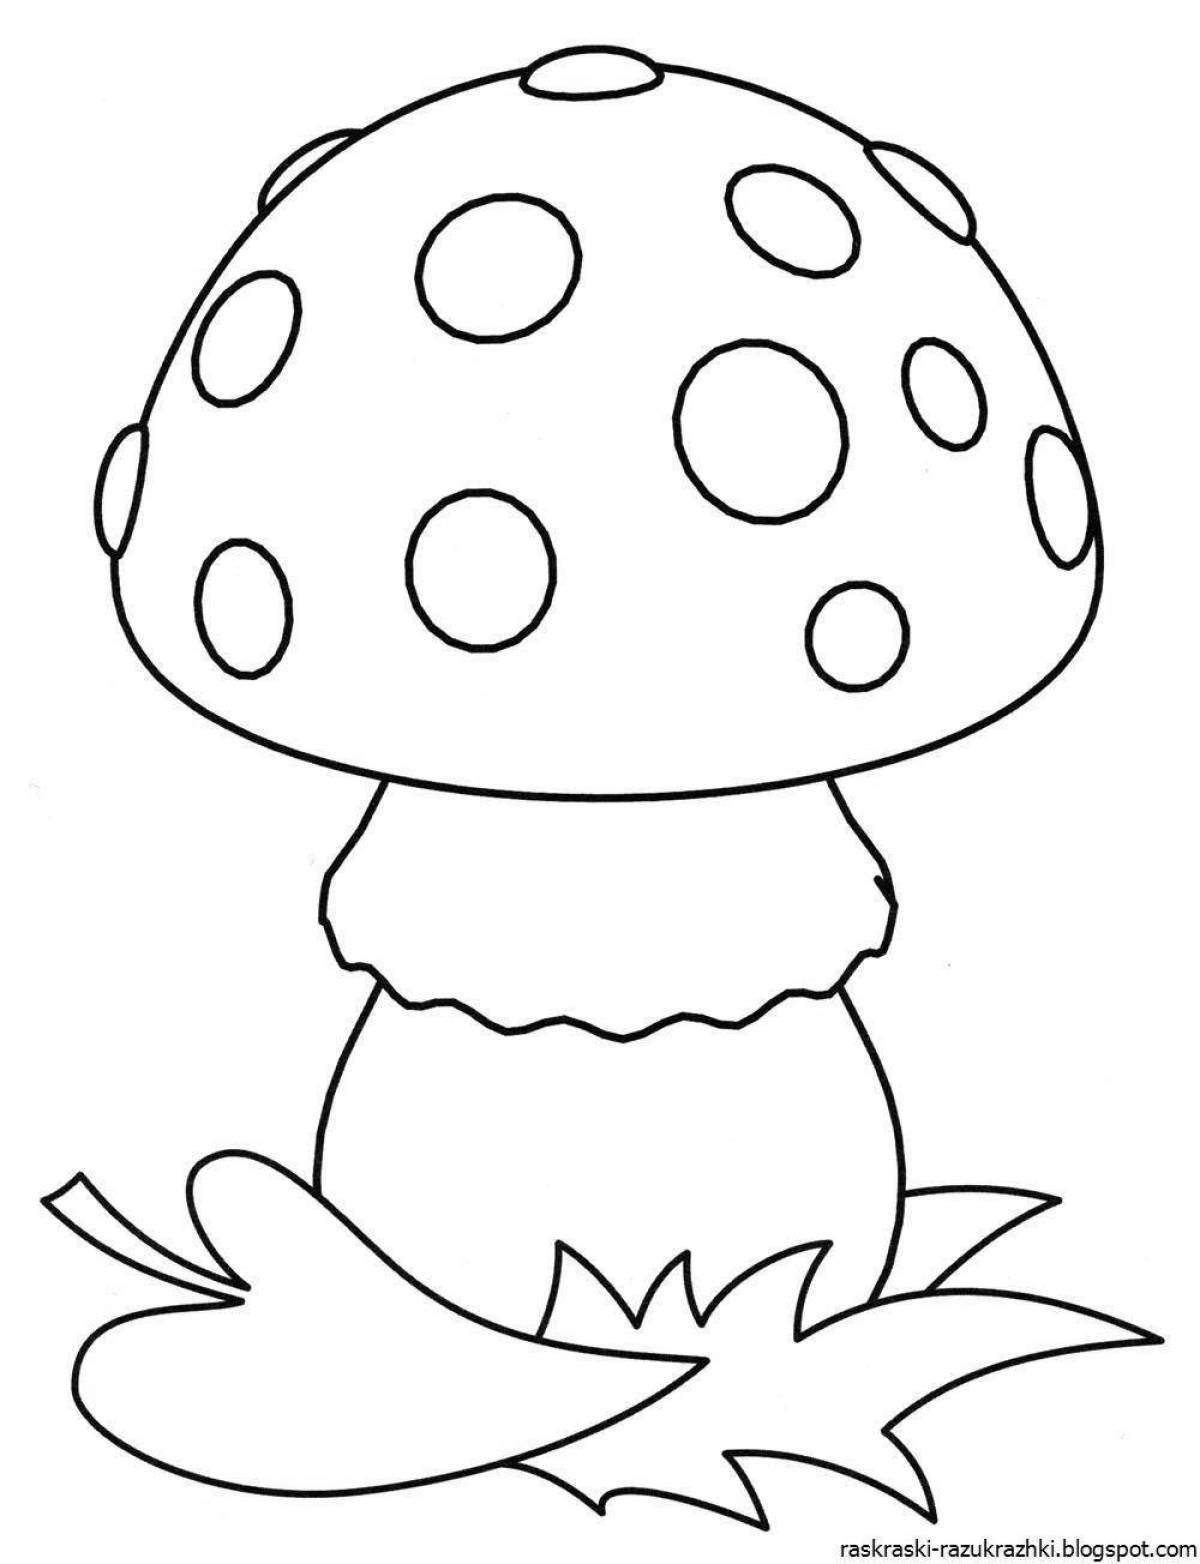 Fancy fly agaric coloring pages for kids